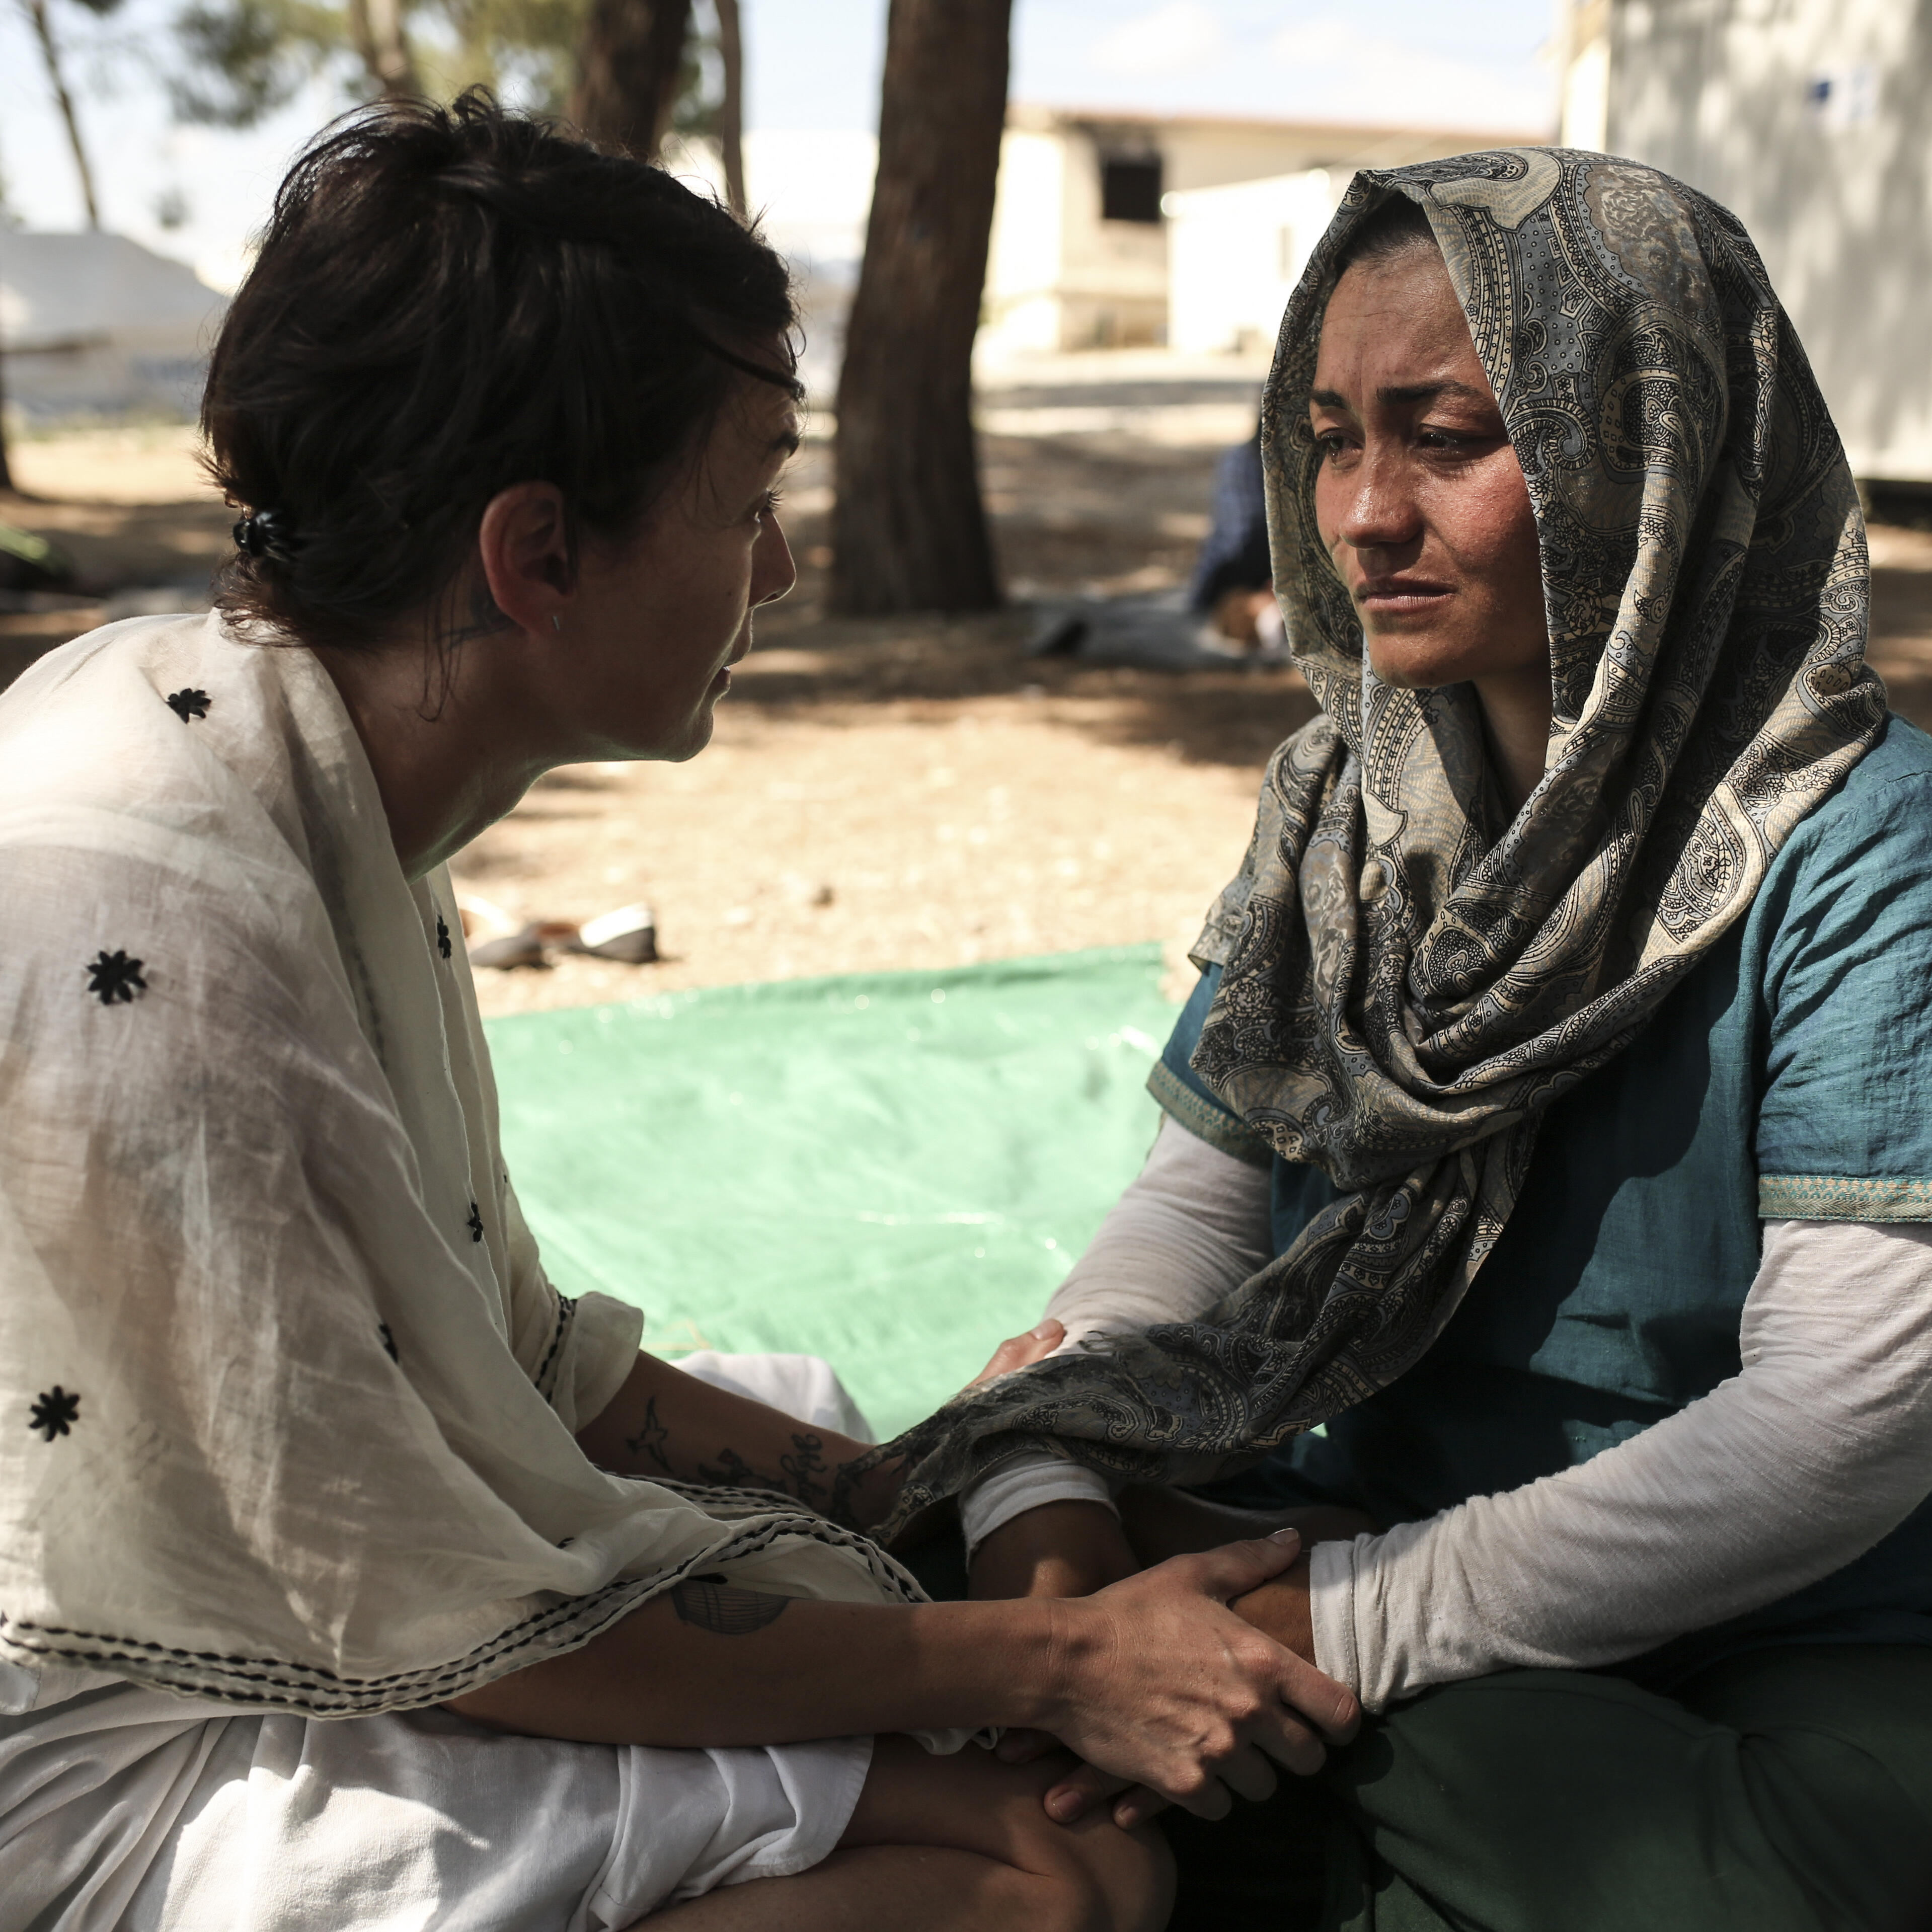 Lena Headey, who plays Cersei Lannister on Game of Thrones, talks with Afghan refugee Rehanna, age 27, holding her hands